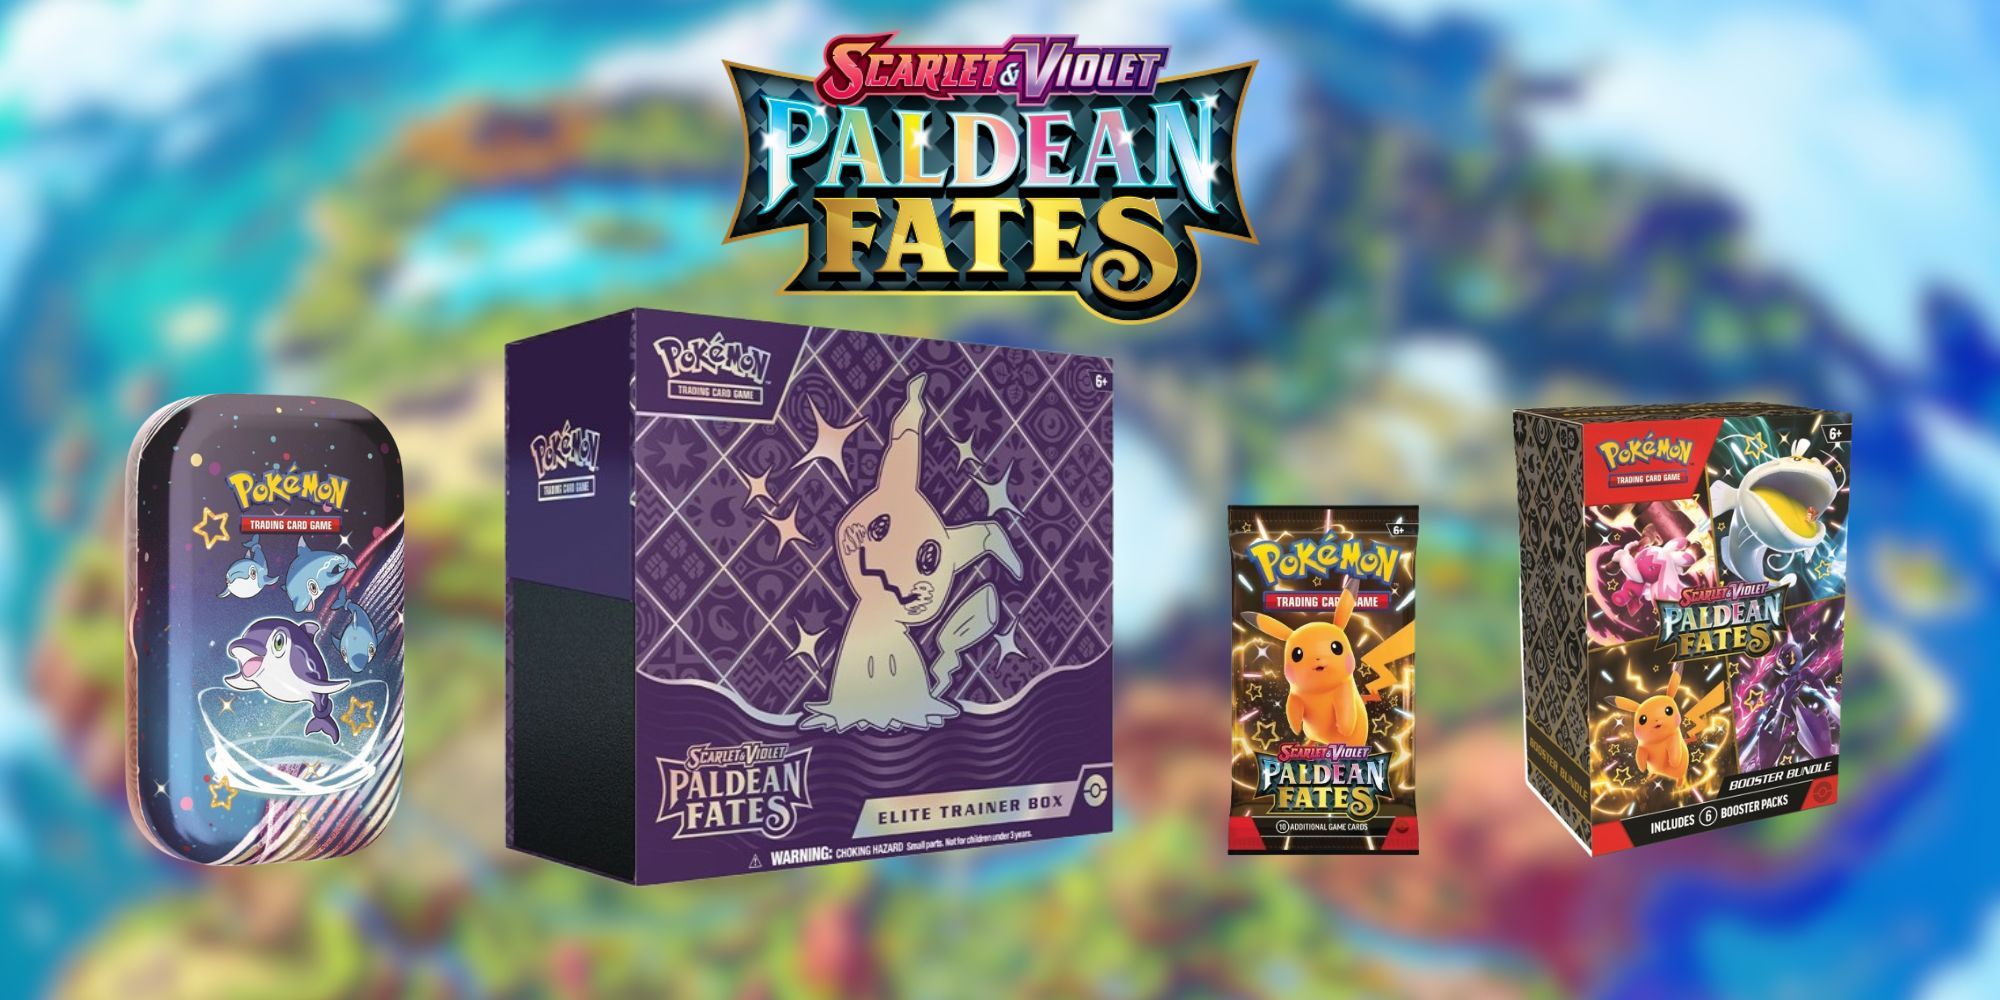 Feature image with the Pokemon TCG Paldean Fates products and logo on a blurred map.